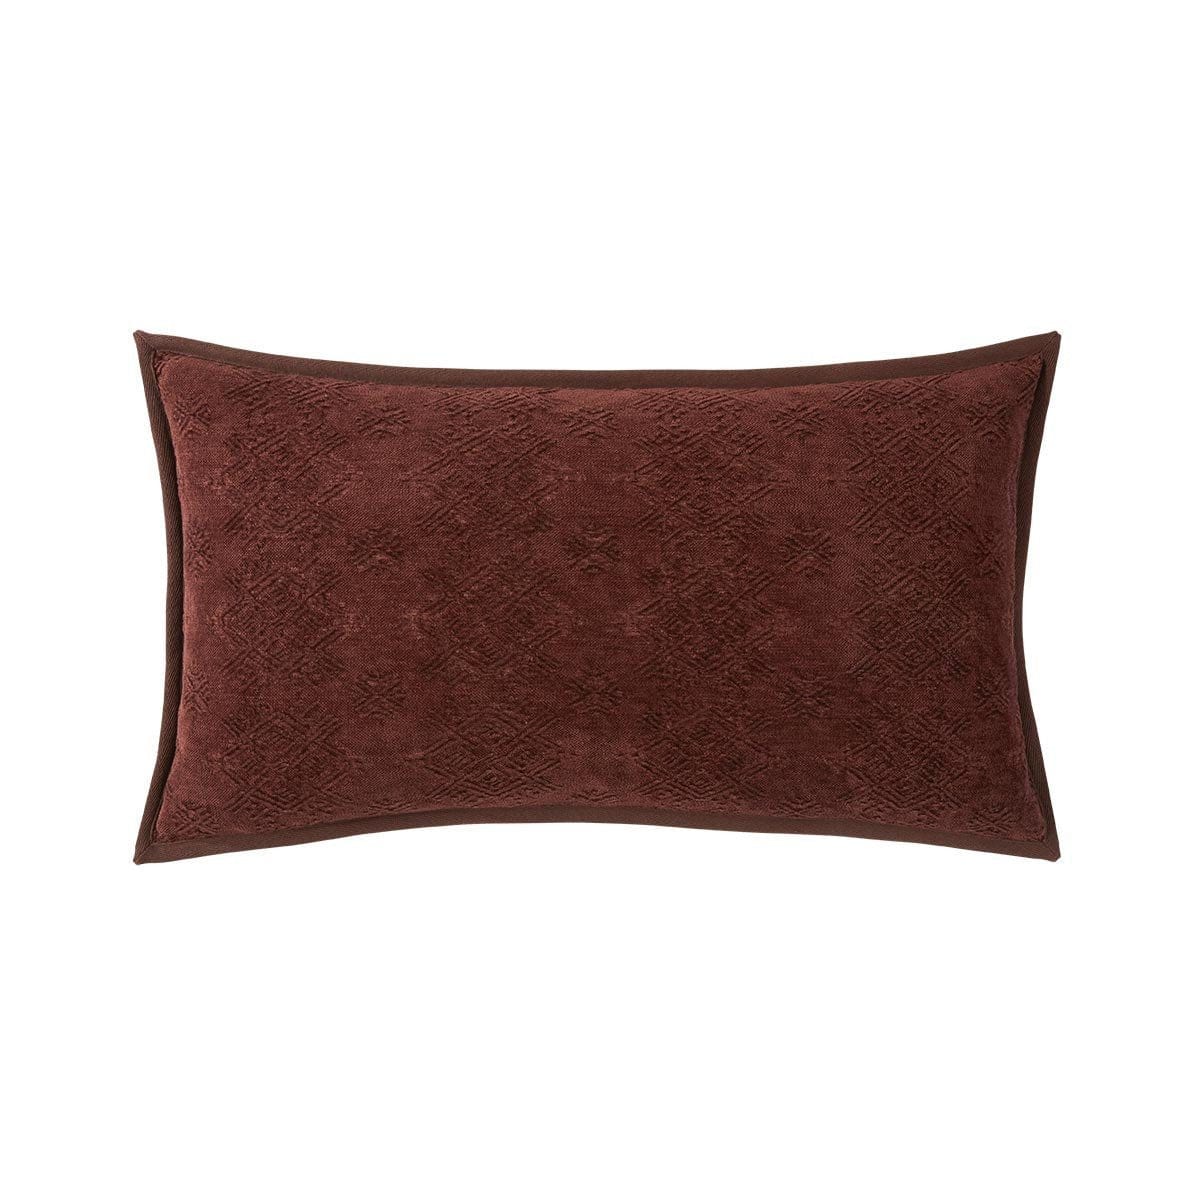 Decorative Pillows Iosis Syracuse Decorative Pillow by Yves Delorme Acajou Yves Delorme